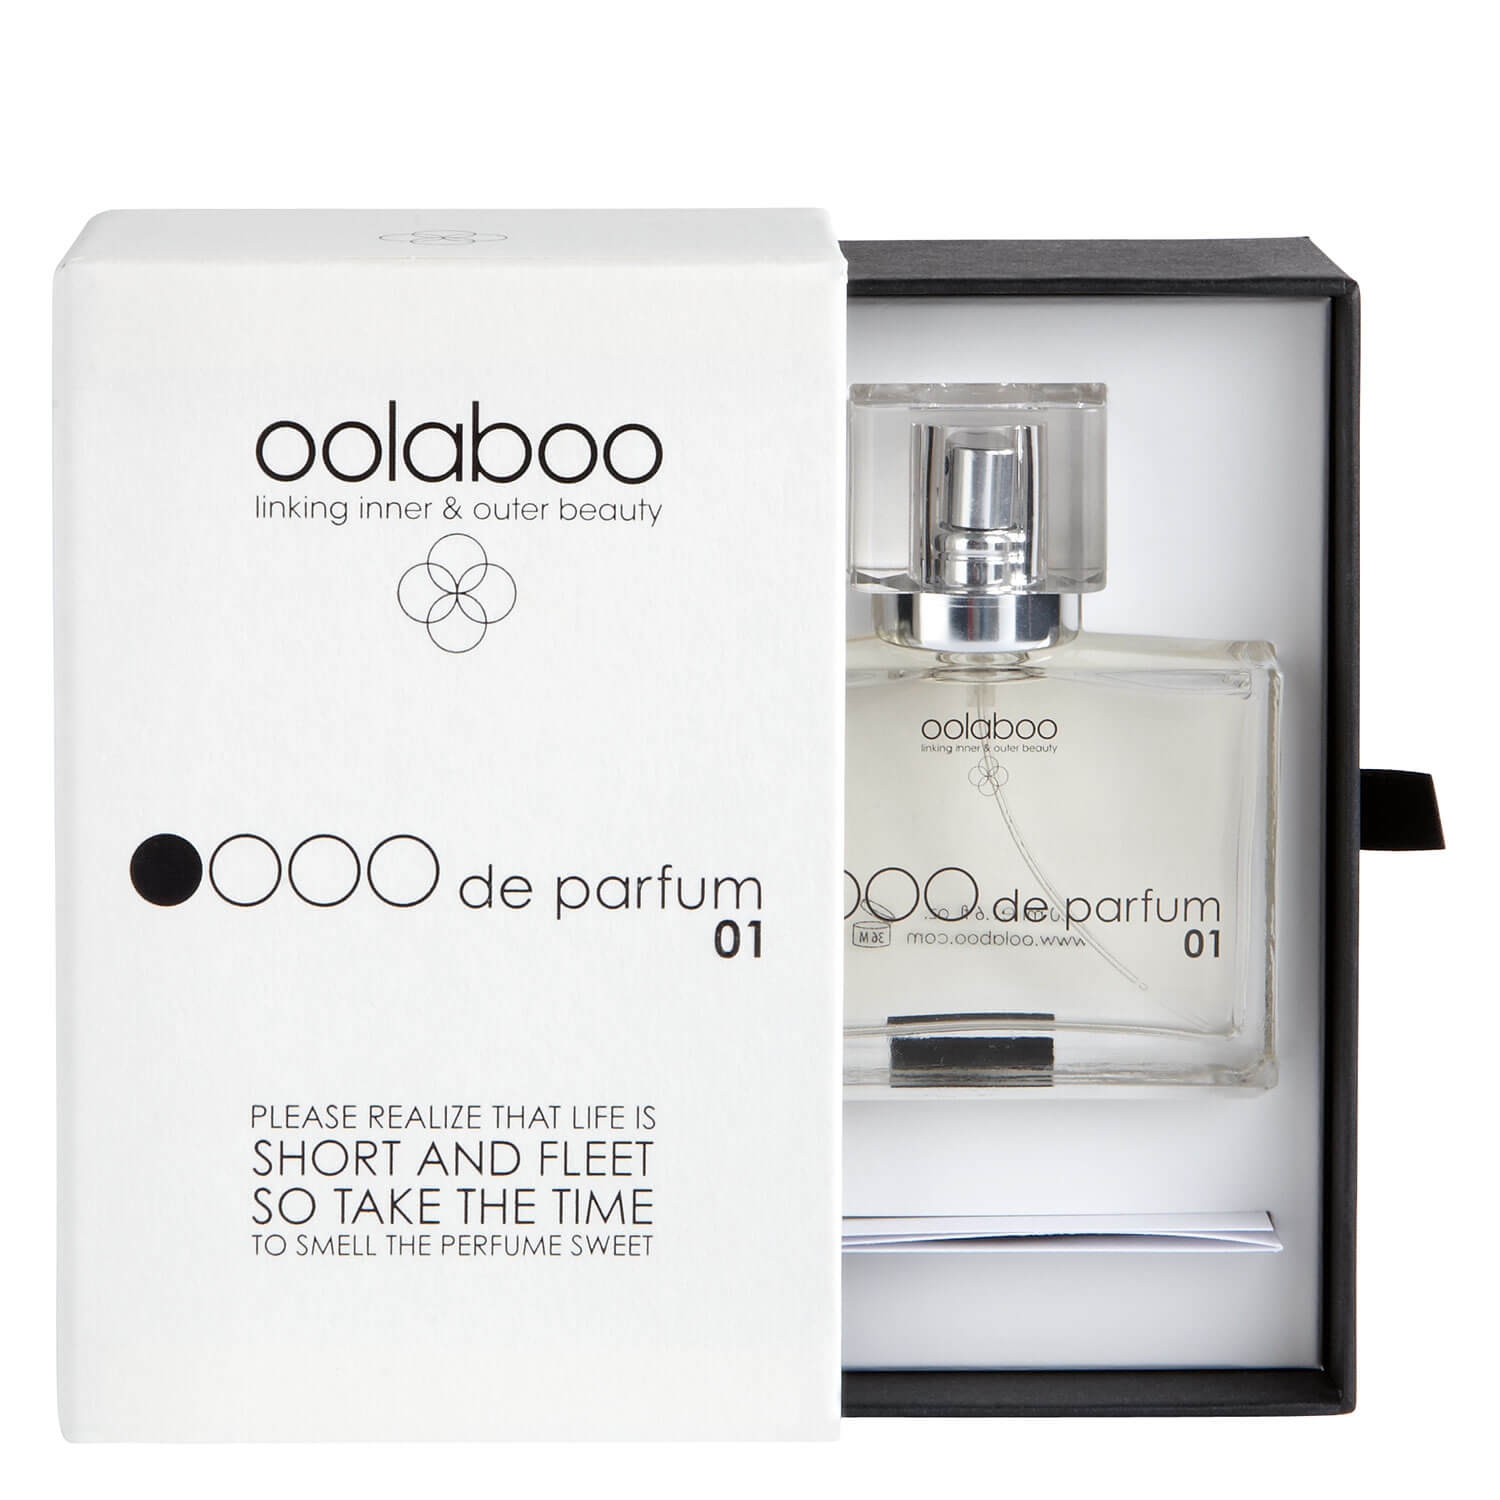 Product image from ambiance - oooo de parfum